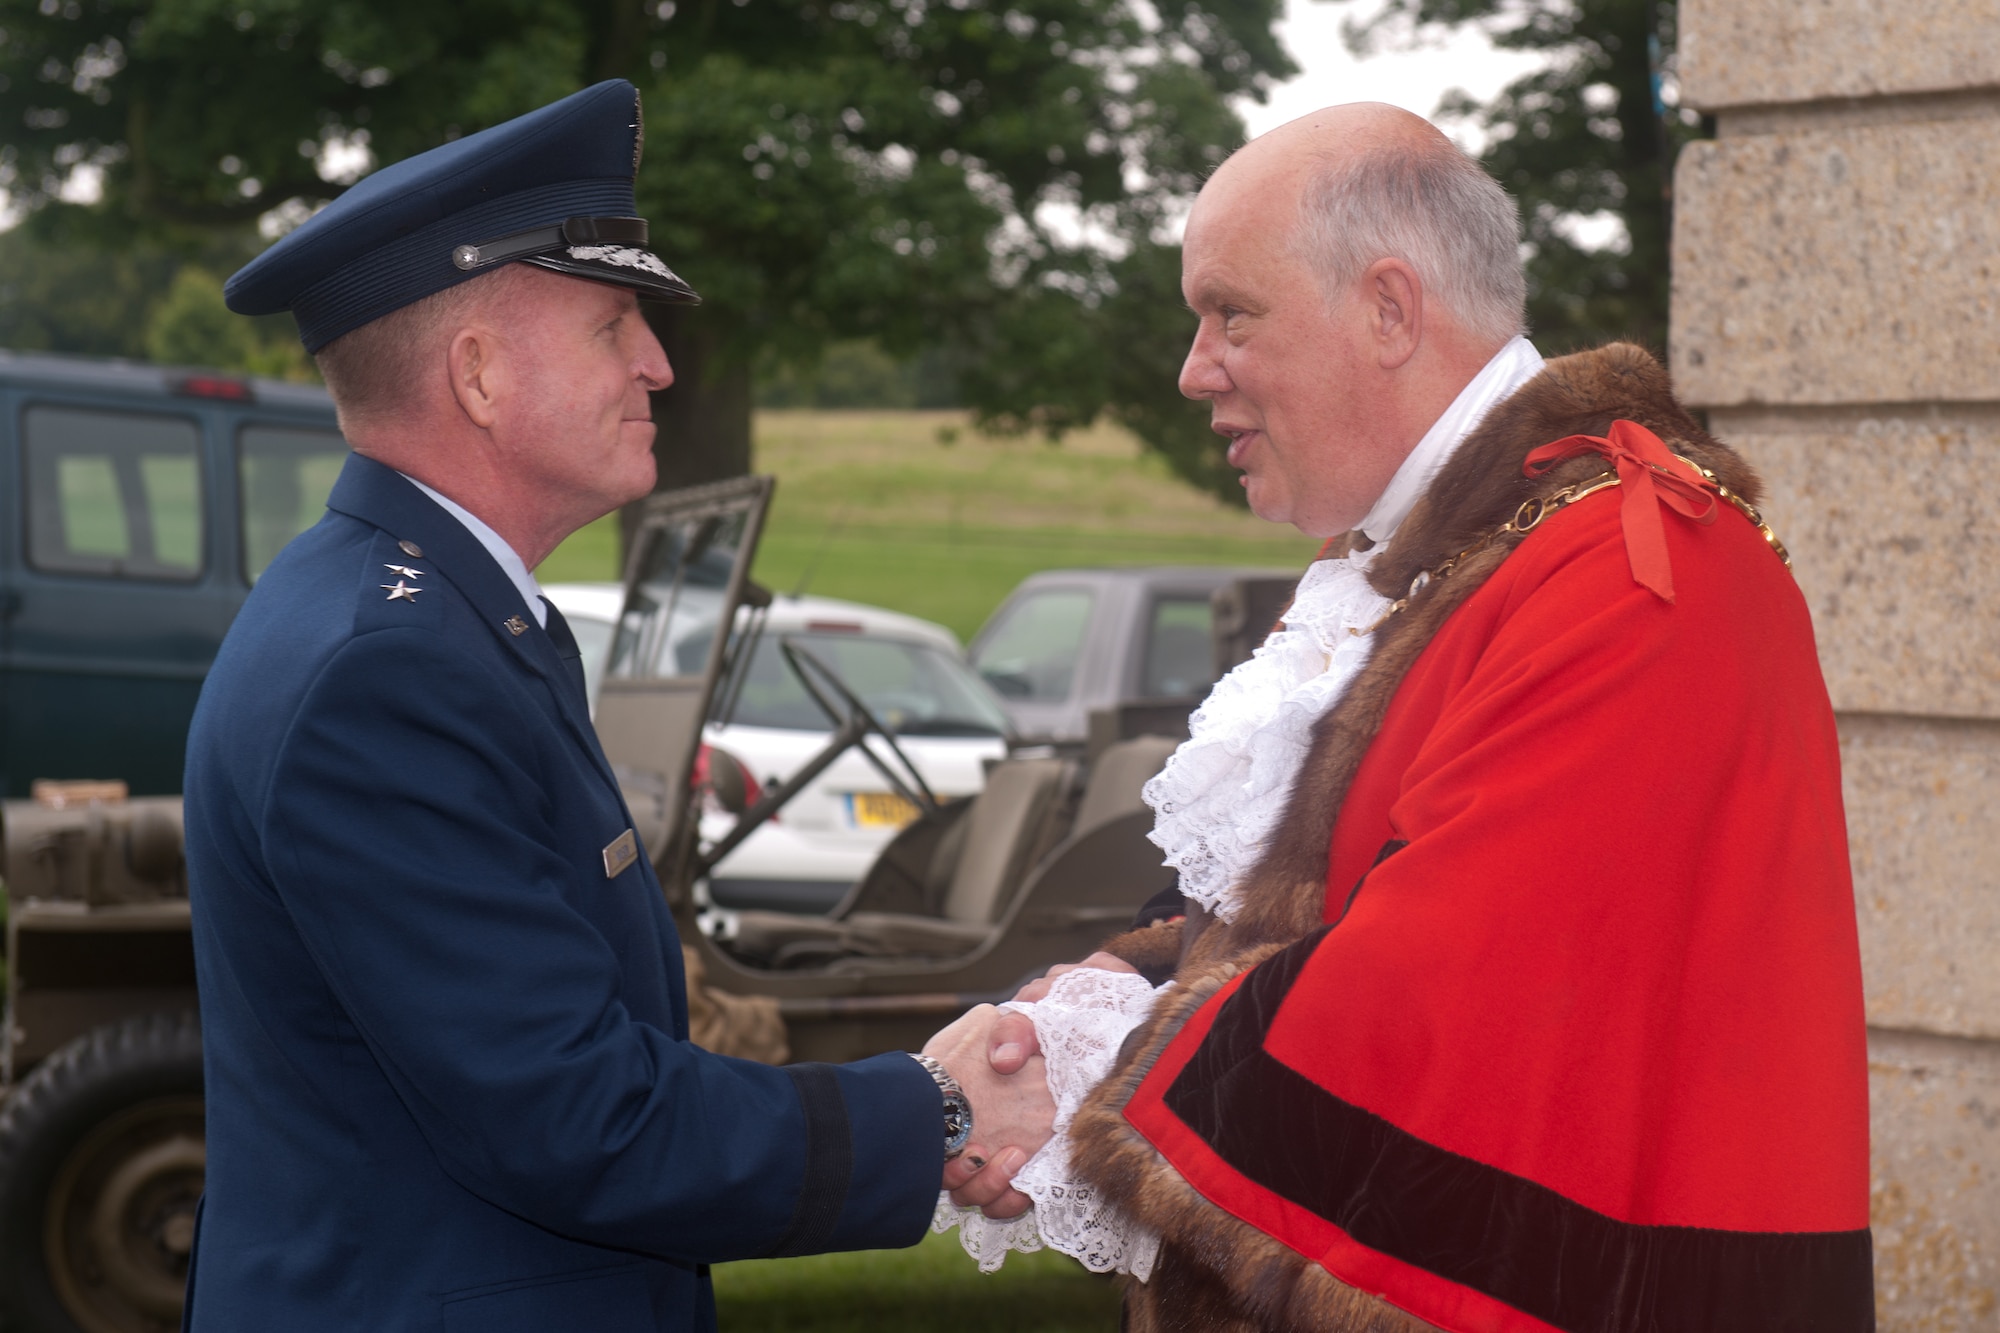 GRAFTON UNDERWOOD, United Kingdom – Councilor James Hakewill, the Mayor of Kettering Borough, greets Maj. Gen. Stephen Wilson, Eighth Air Force commander, as he enters Boughton House Aug. 17. The day marked the 70th anniversary of the first Eighth Air Force bombers, from the 97th Bombardment Group (Heavy), participating in World War II which launched from Grafton Underwood. Col. Frank Armstrong, 97th BG commander, and the 340th Bomb Squadron commander Maj. Paul Tibbets (who later flew the Enola Gay to Hiroshima, Japan, on the first atomic bomb mission) piloted the lead aircraft of the group, Butcher Shop. In the leading aircraft of the second flight, Yankee Doodle, flew Gen. Ira C. Eaker, the commanding general of the VIII Bomber Command. (U.S. Air Force photo by Staff Sgt. Brian Stives)